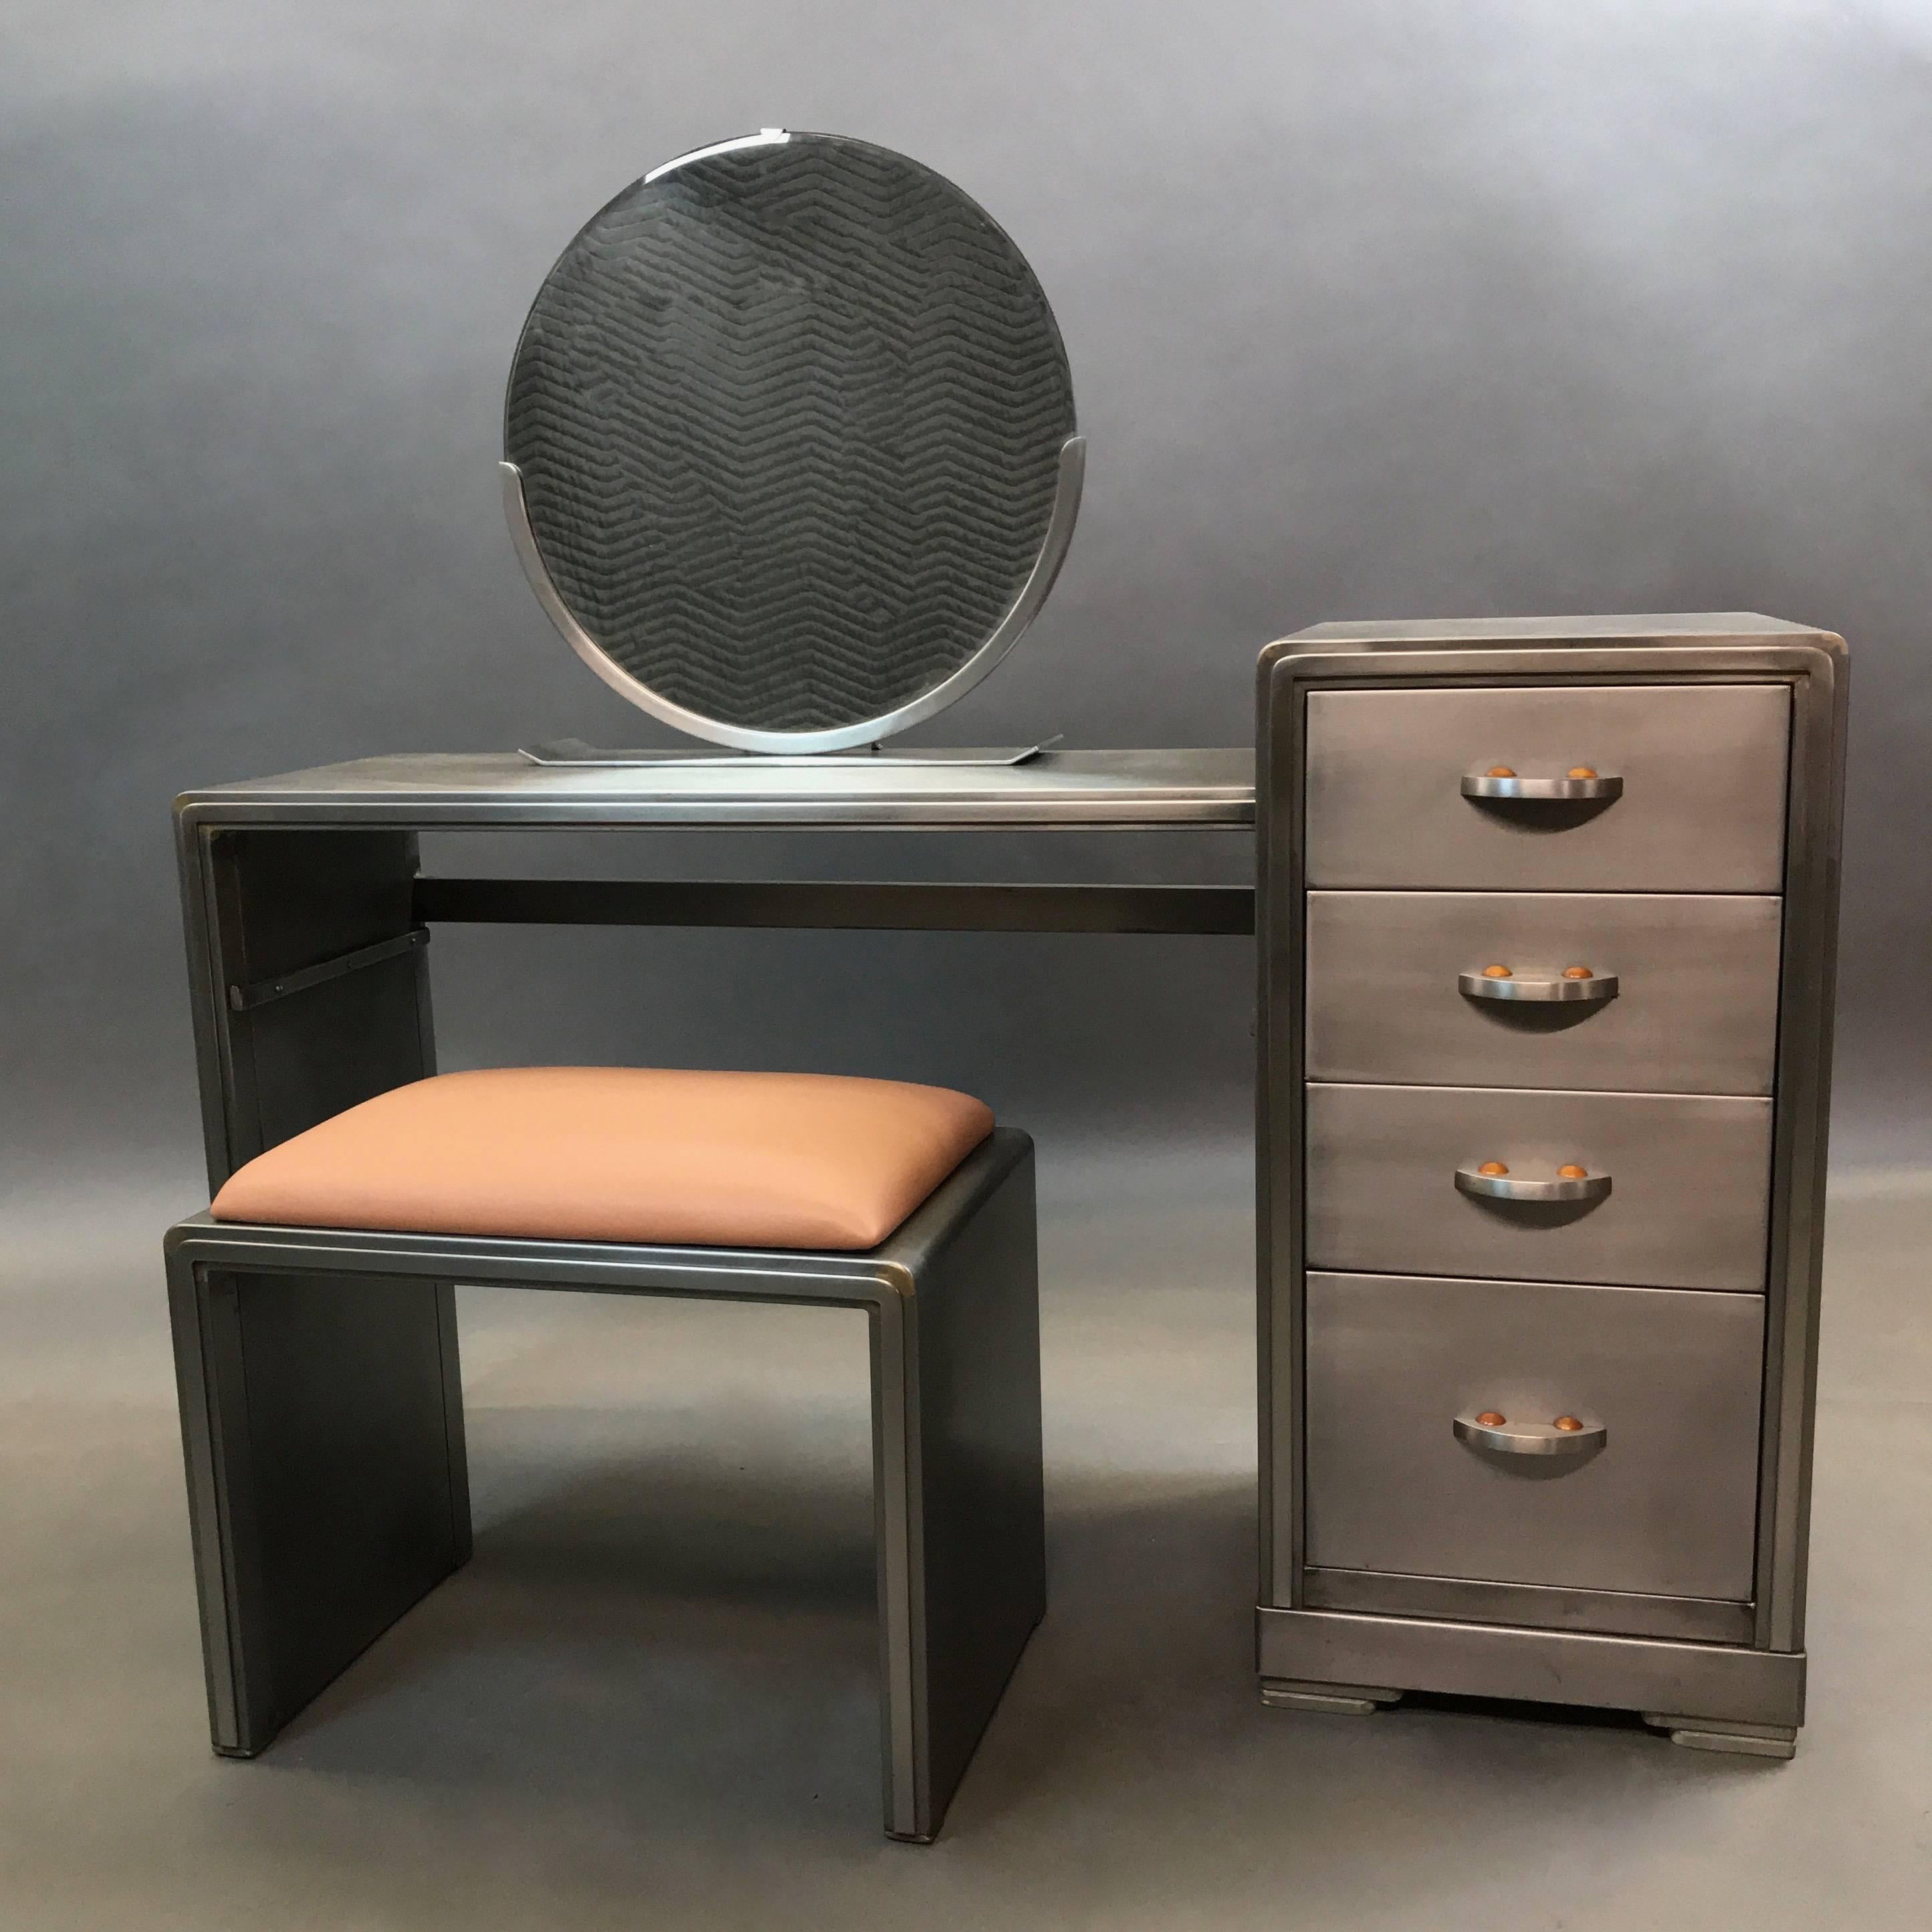 Machine Age, Art Deco, brushed steel vanity desk set designed by Norman Bel Geddes for Simmons Company Furniture features a round, mounted mirror, four-drawer single pedestal with copper detailed pulls and matching bench upholstered in a copper